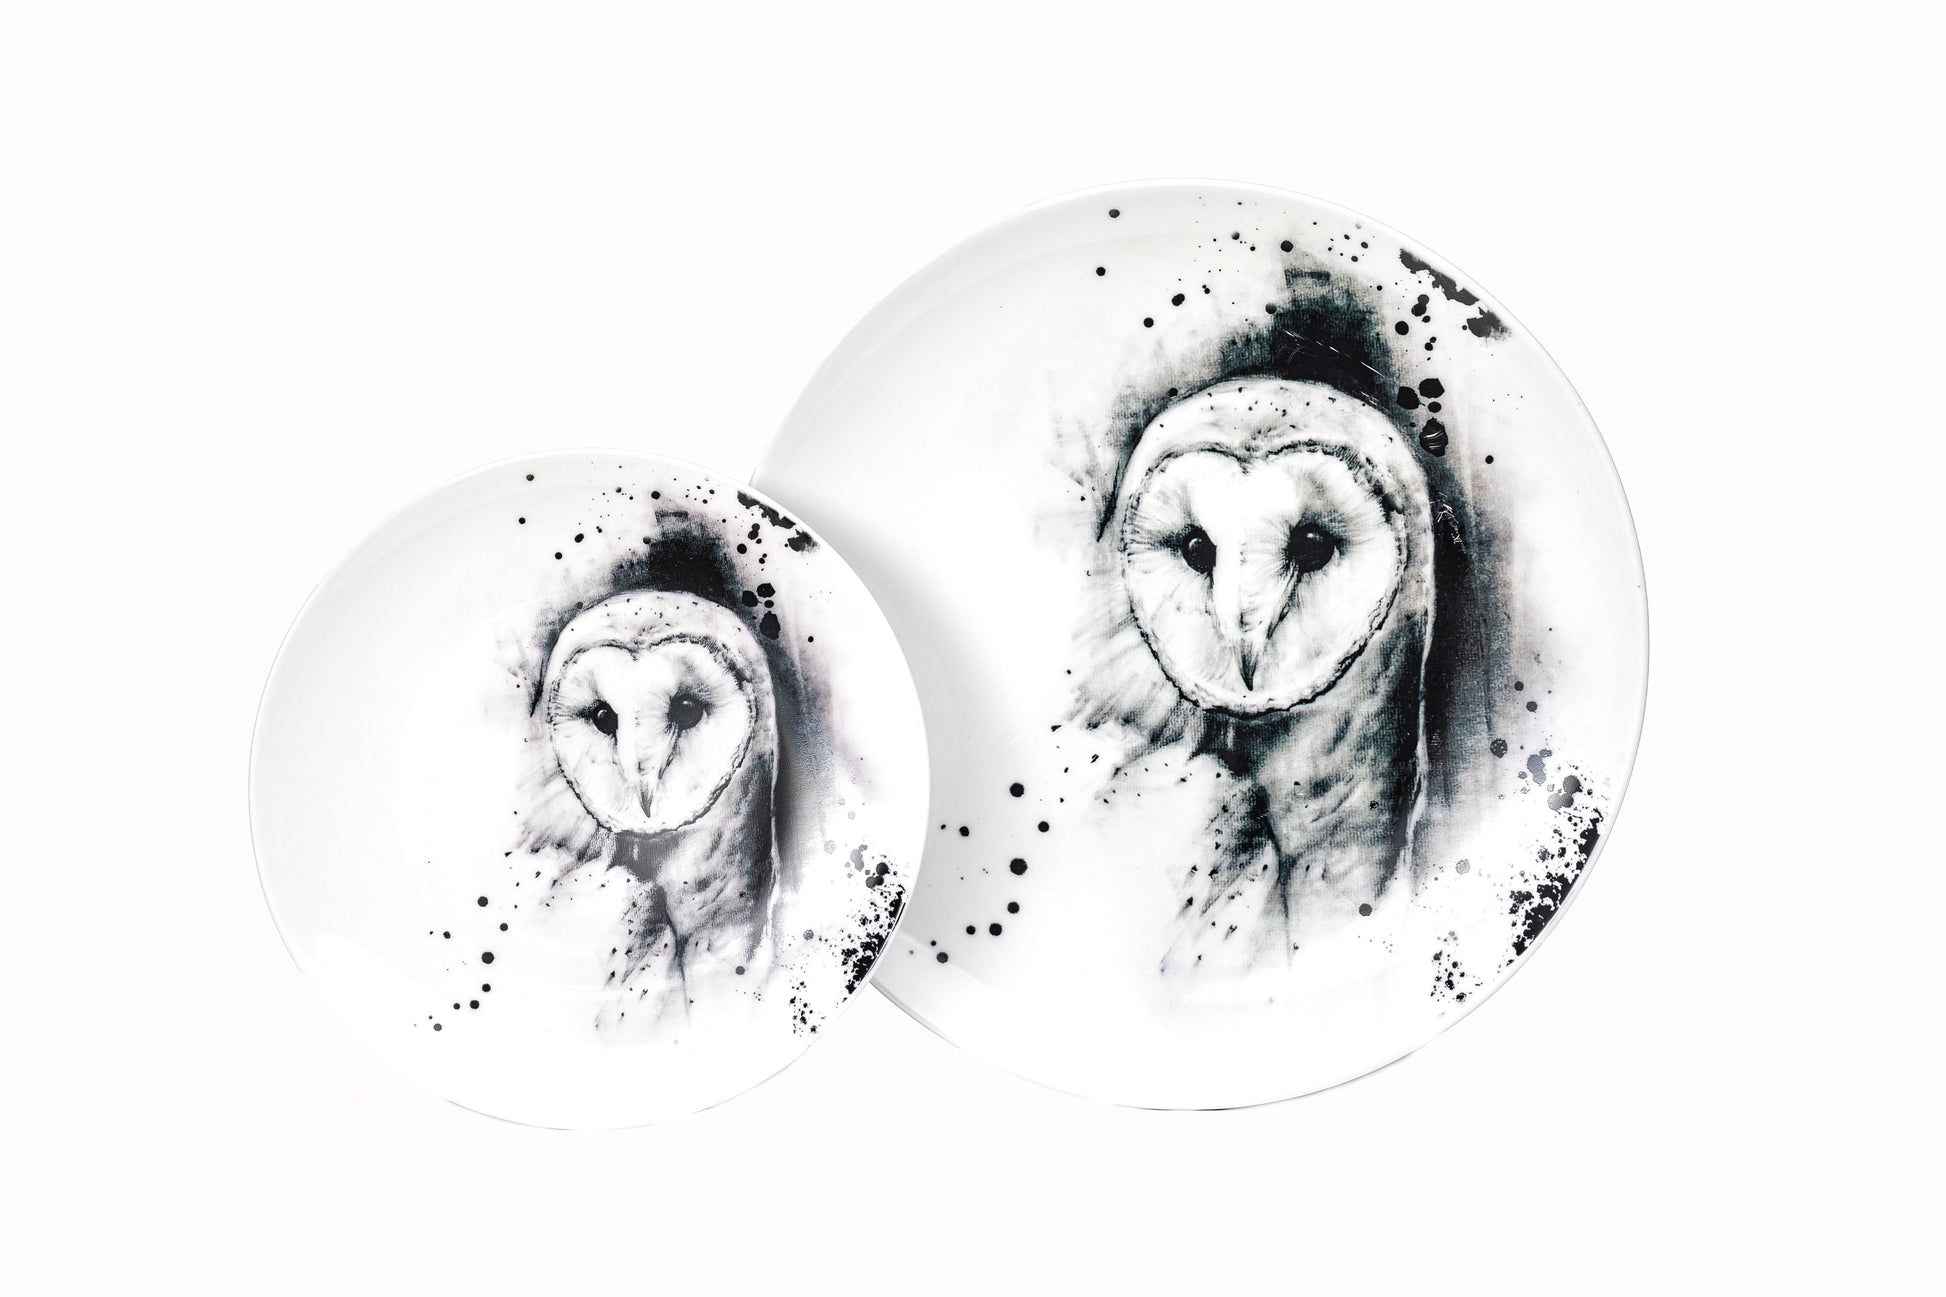 Dinnerware set of 4, 6, 8 containing one white porcelain dinner plate, and one salad plate each with Barn Owl illustration and black ink splatter dishwasher and microwave safe product photo on white background